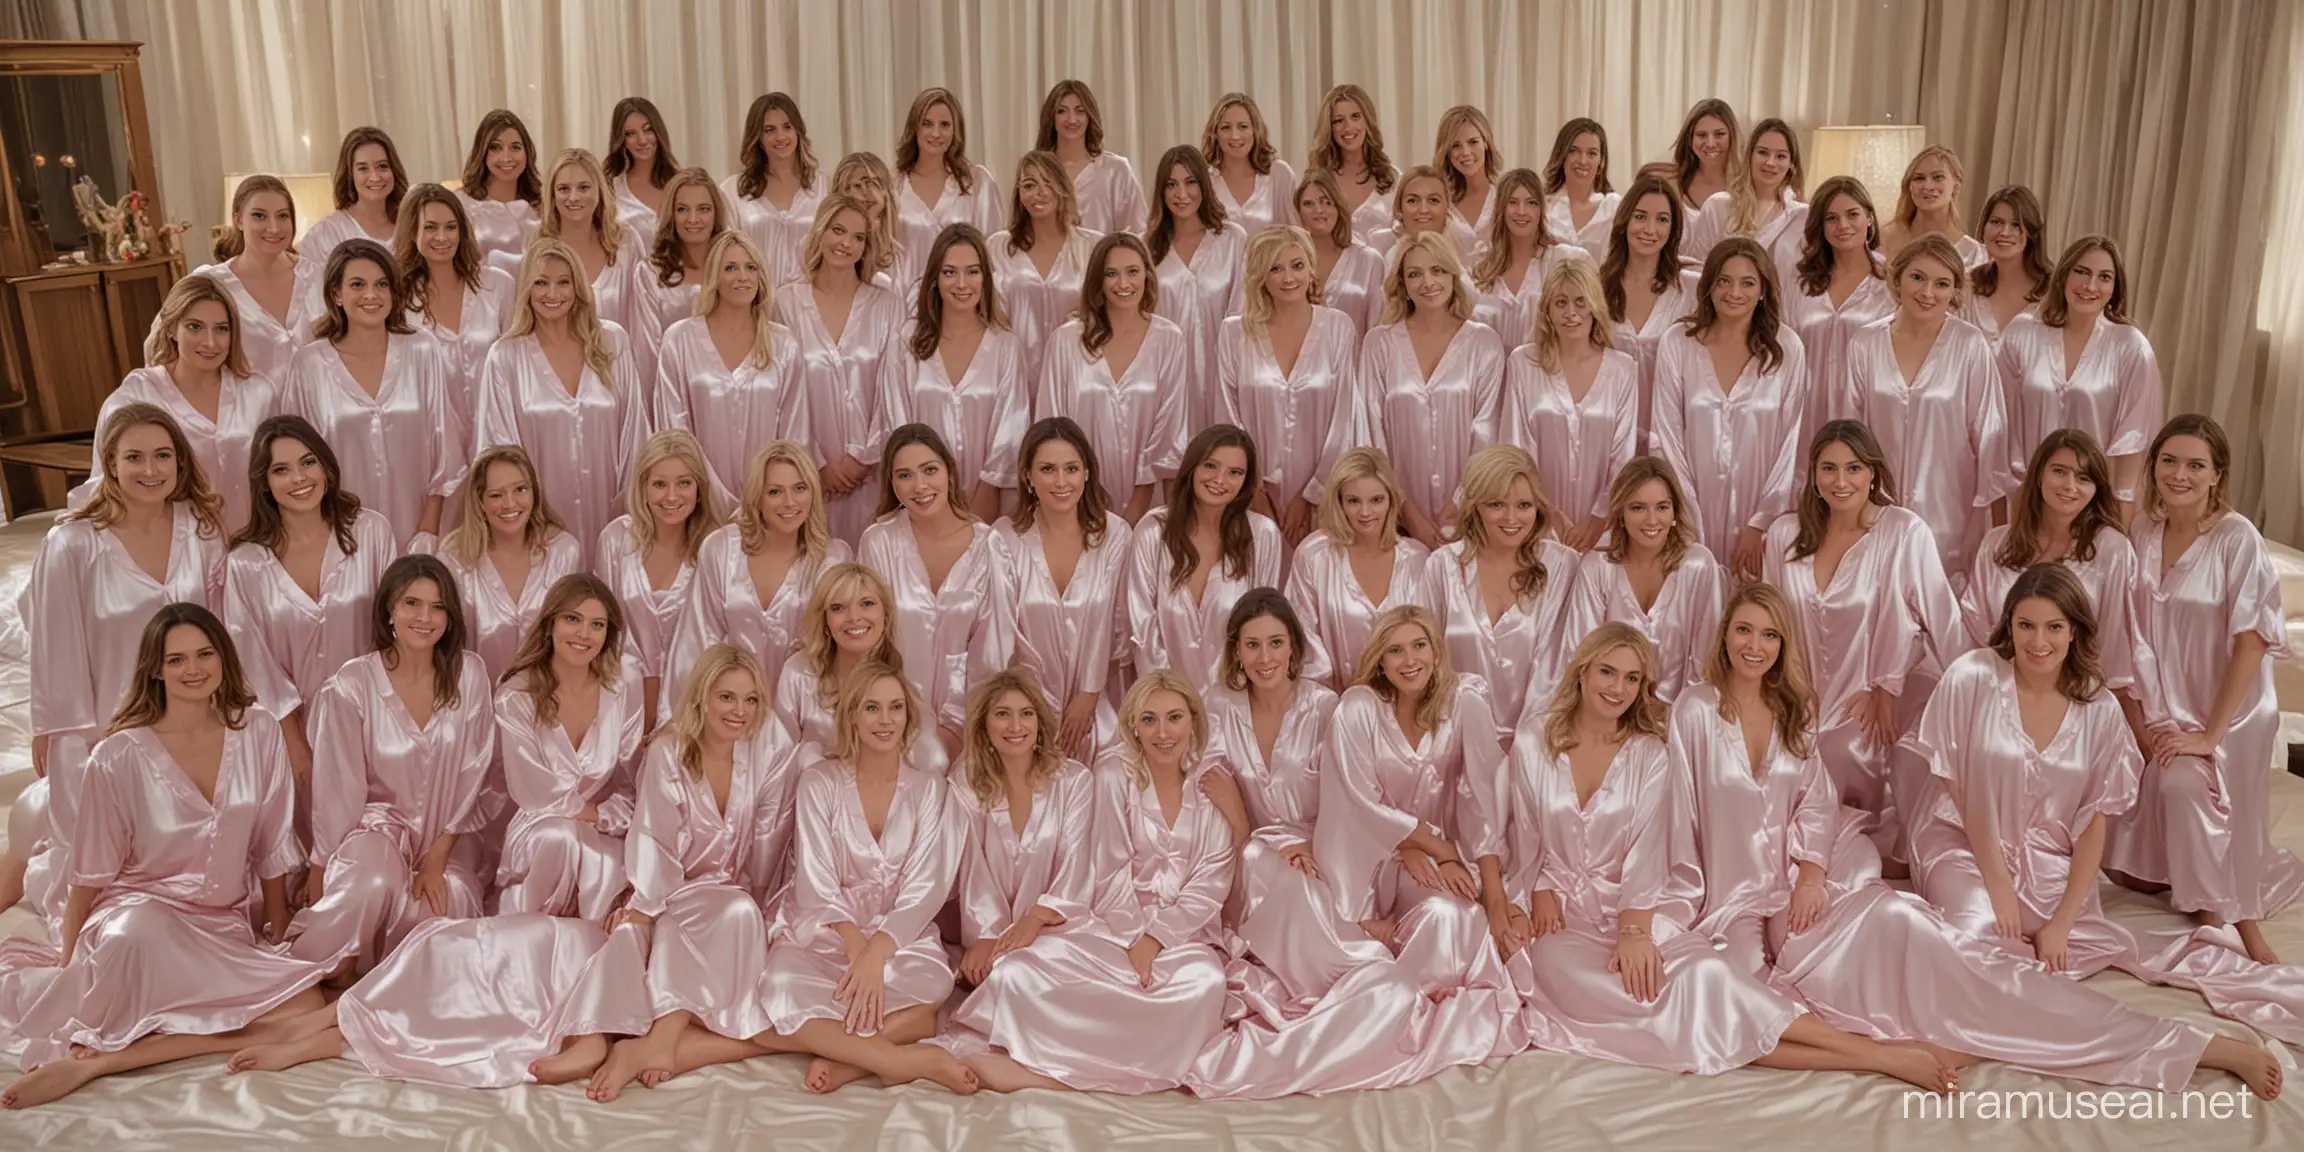 Gathering of Women in Milky Satin Nightgowns on Giant Bed